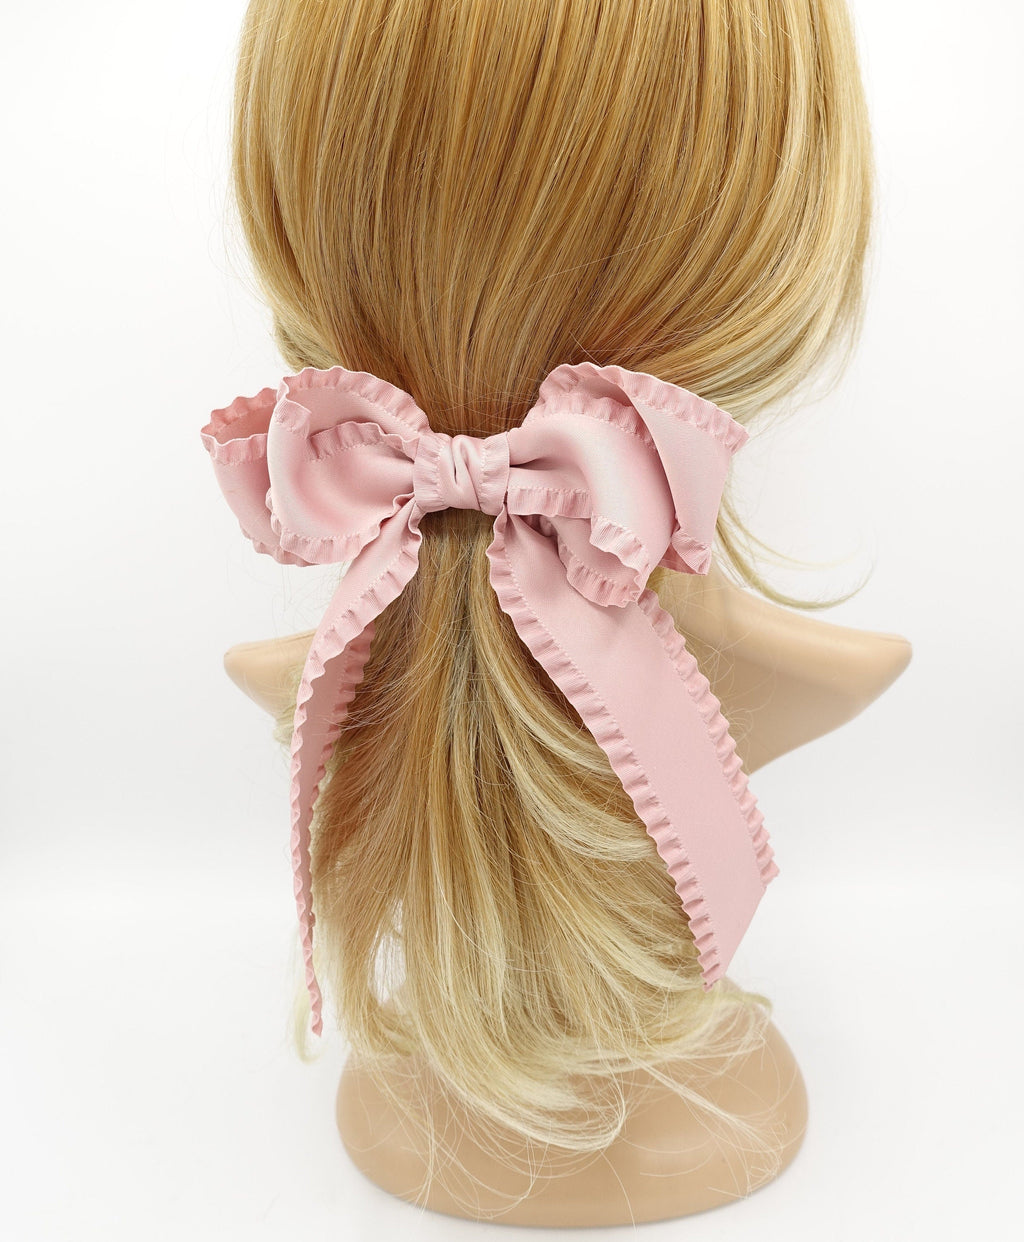 veryshine.com Pink long tail frill hair bow edge decorated women hair french barrette hair accessory for women